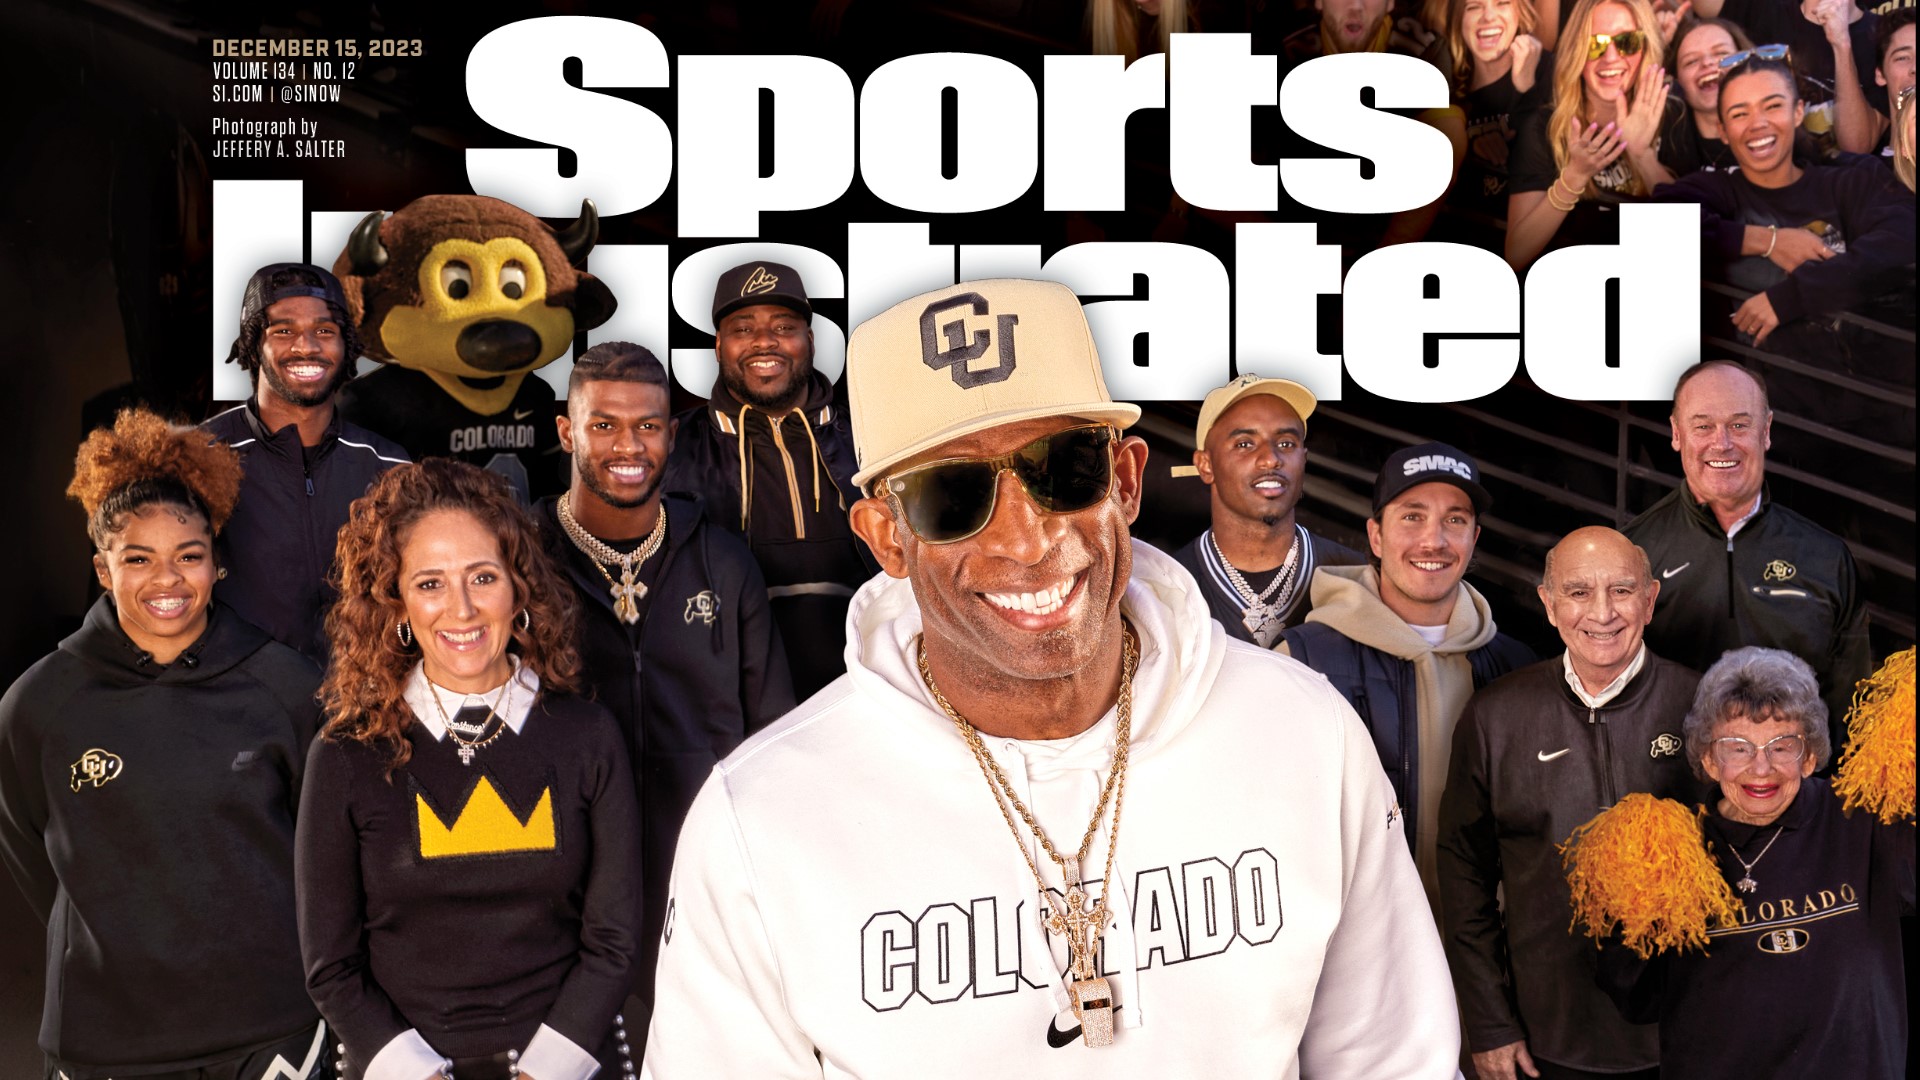 Sports Illustrated has named University of Colorado head football coach Deion Sanders as its Sportsperson of the year.